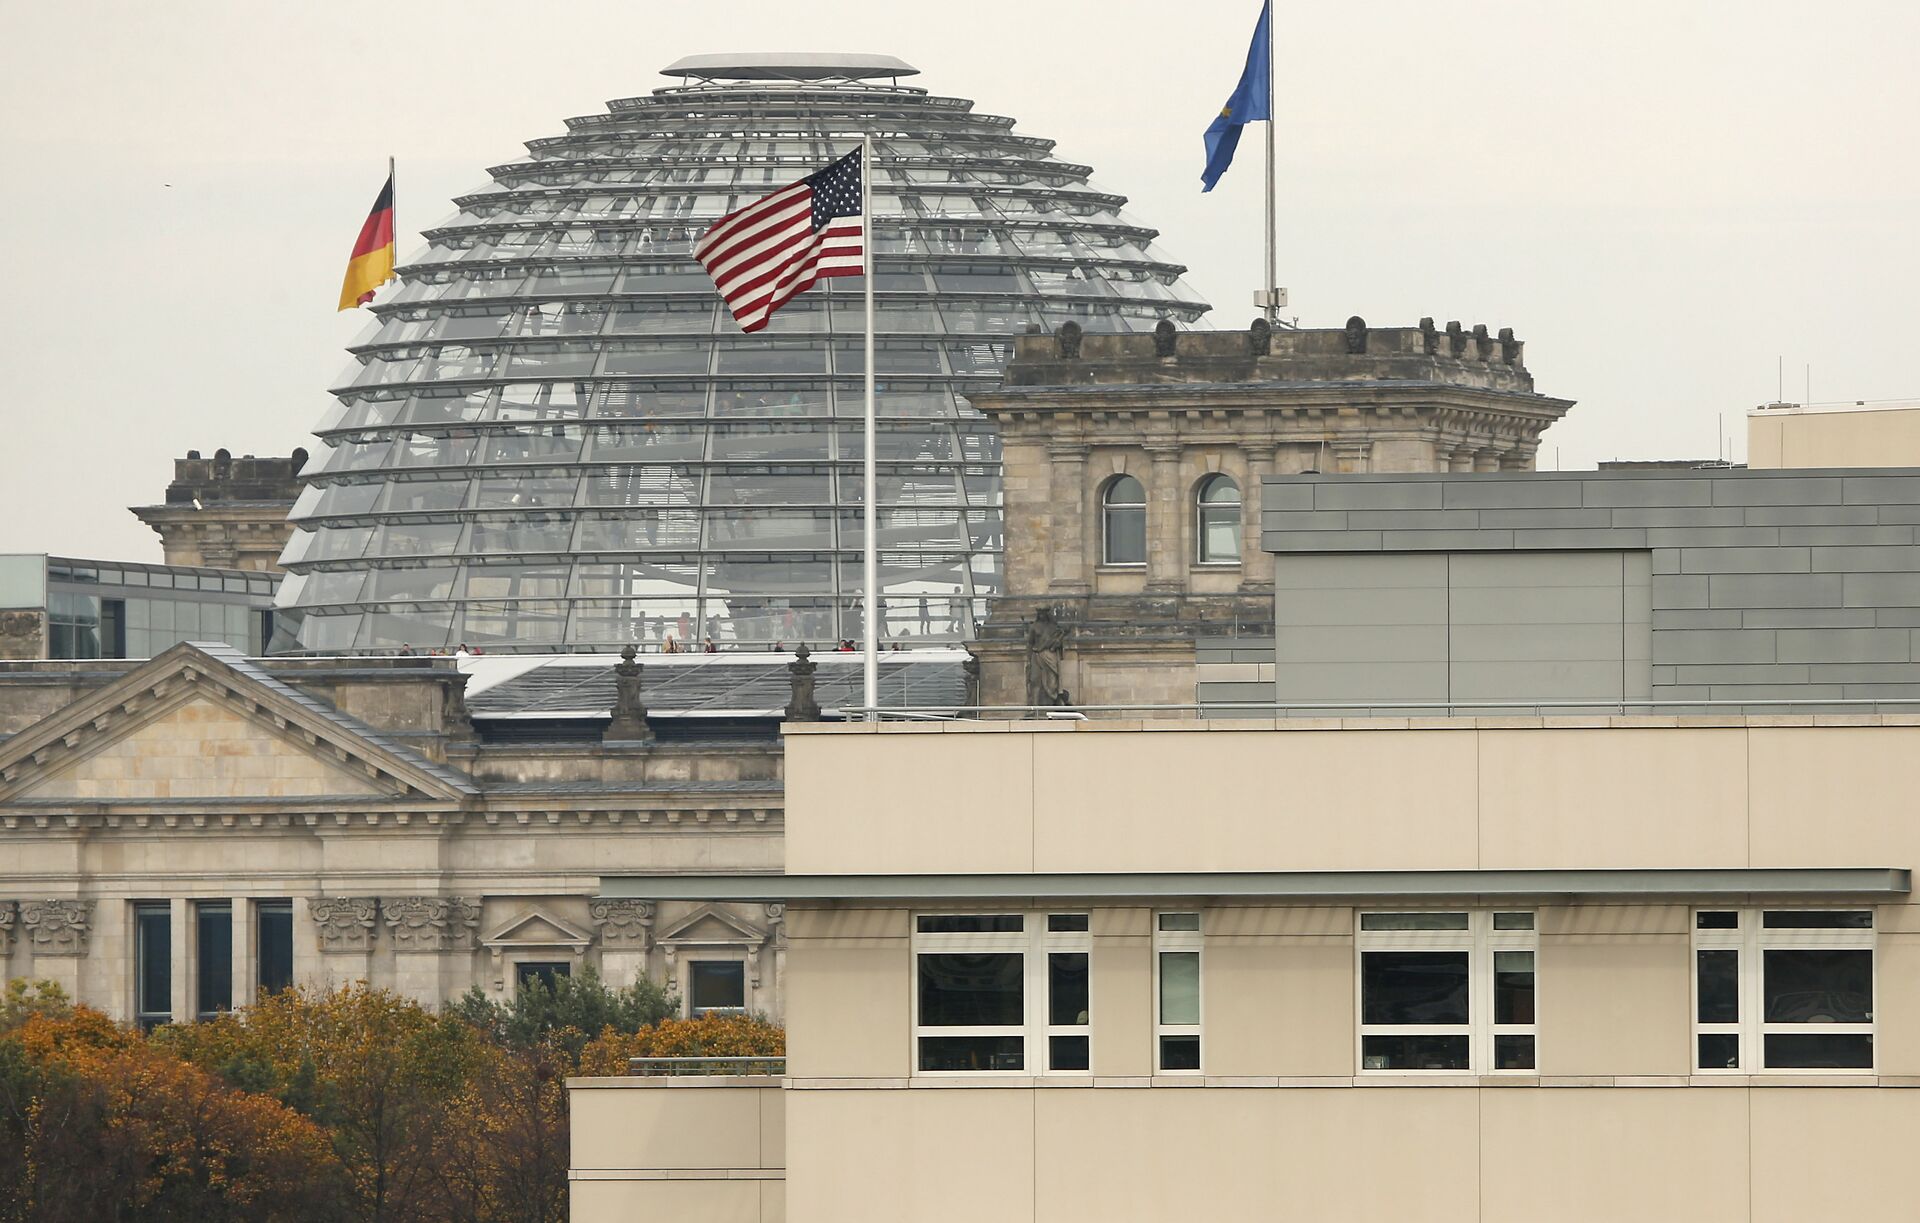 American flag flies on top of the U.S. embassy in front of the Reichstag building that houses the German Parliament, Bundestag, in Berlin, Germany (File) - Sputnik International, 1920, 07.12.2022